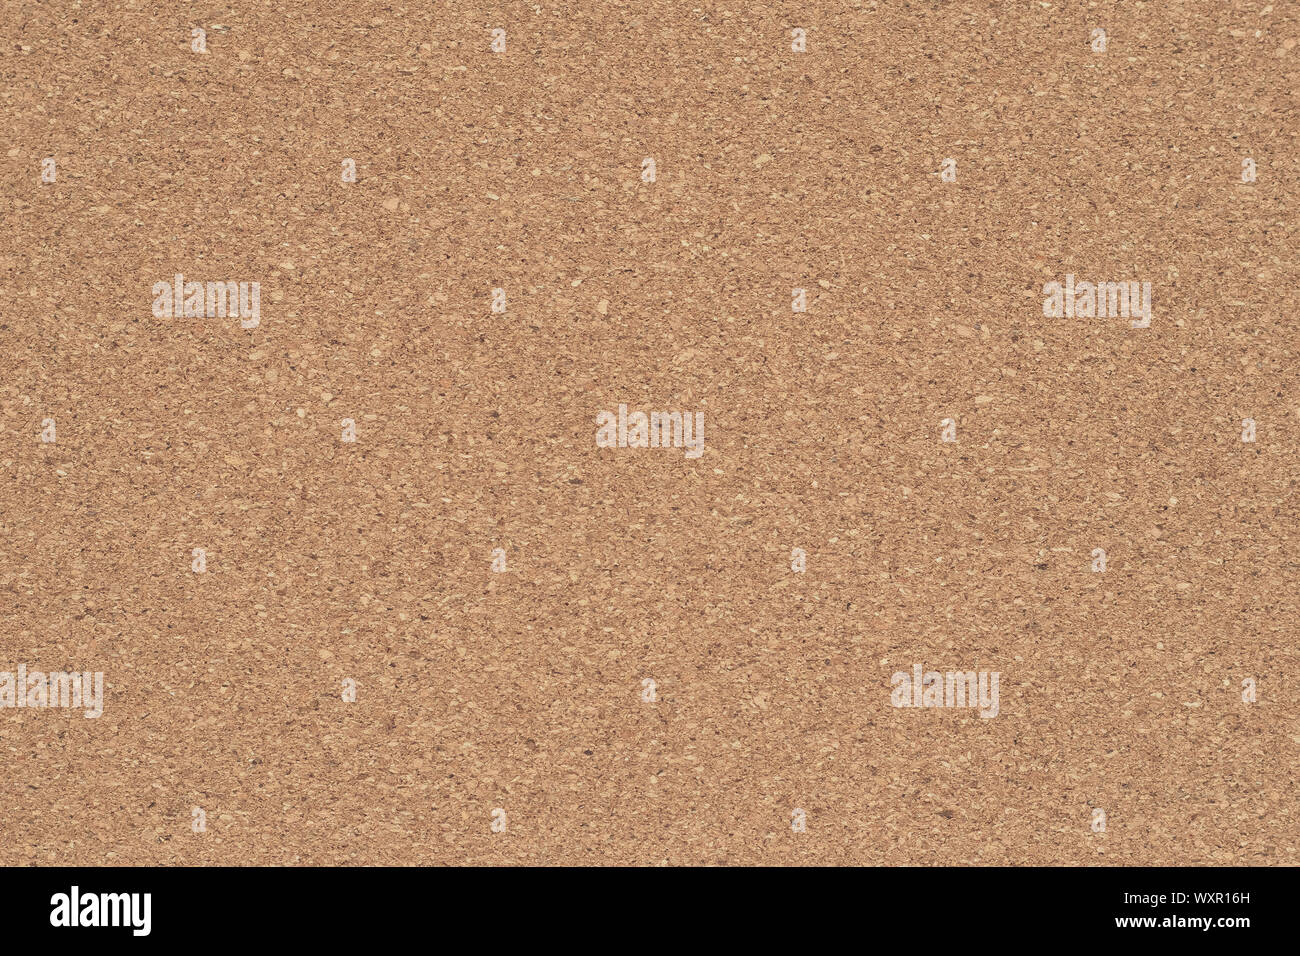 Corkboard background. Brown paper texture. Abstract pattern. Wood backdrop. Cardboard wall. Plywood. Stock Photo